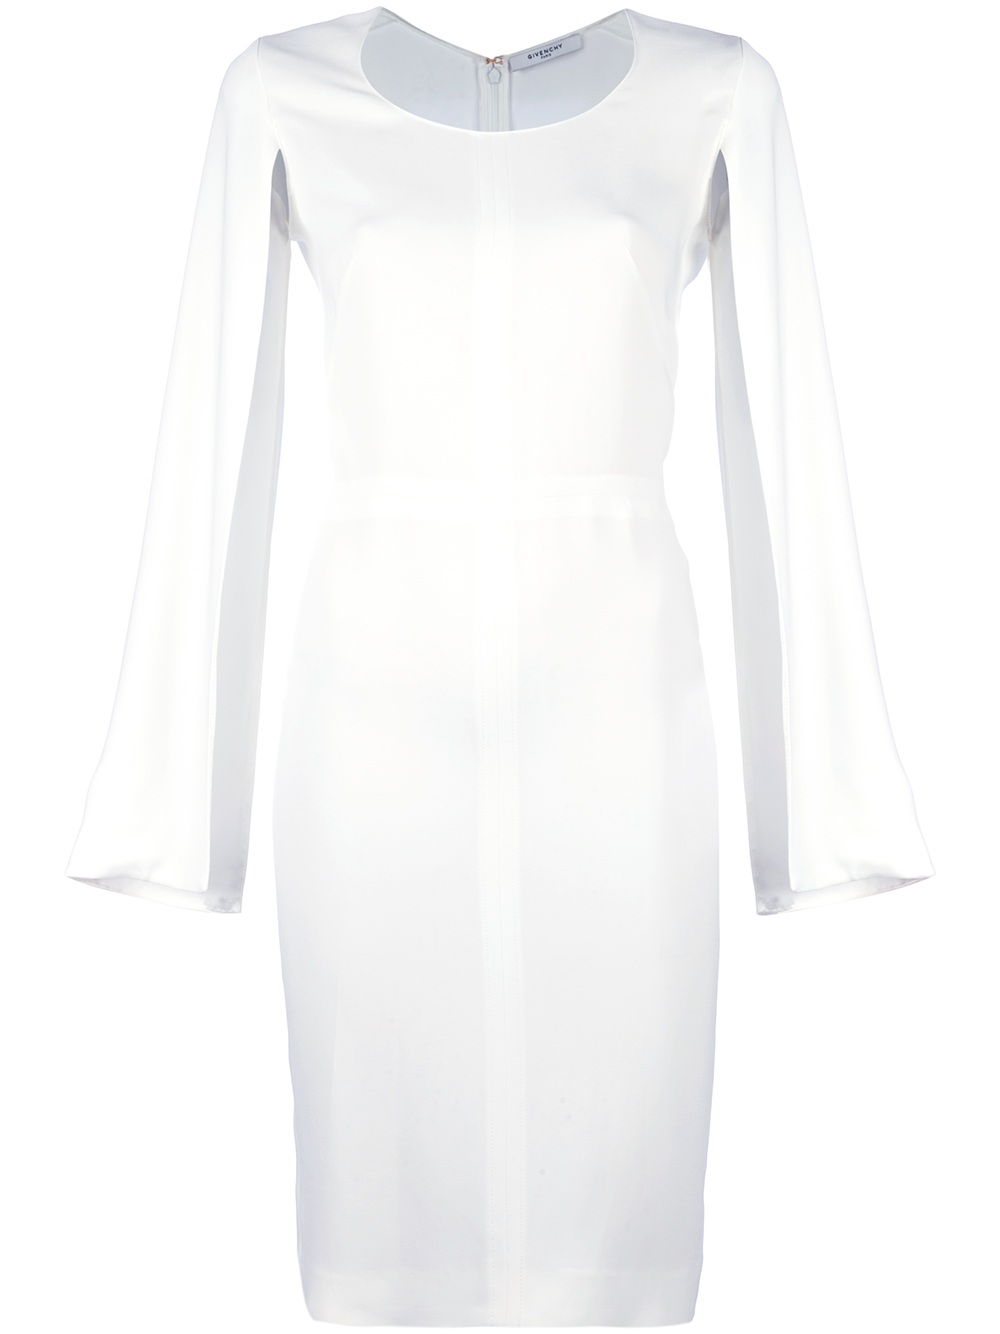 Givenchy Split Sleeve Dress in White | Lyst